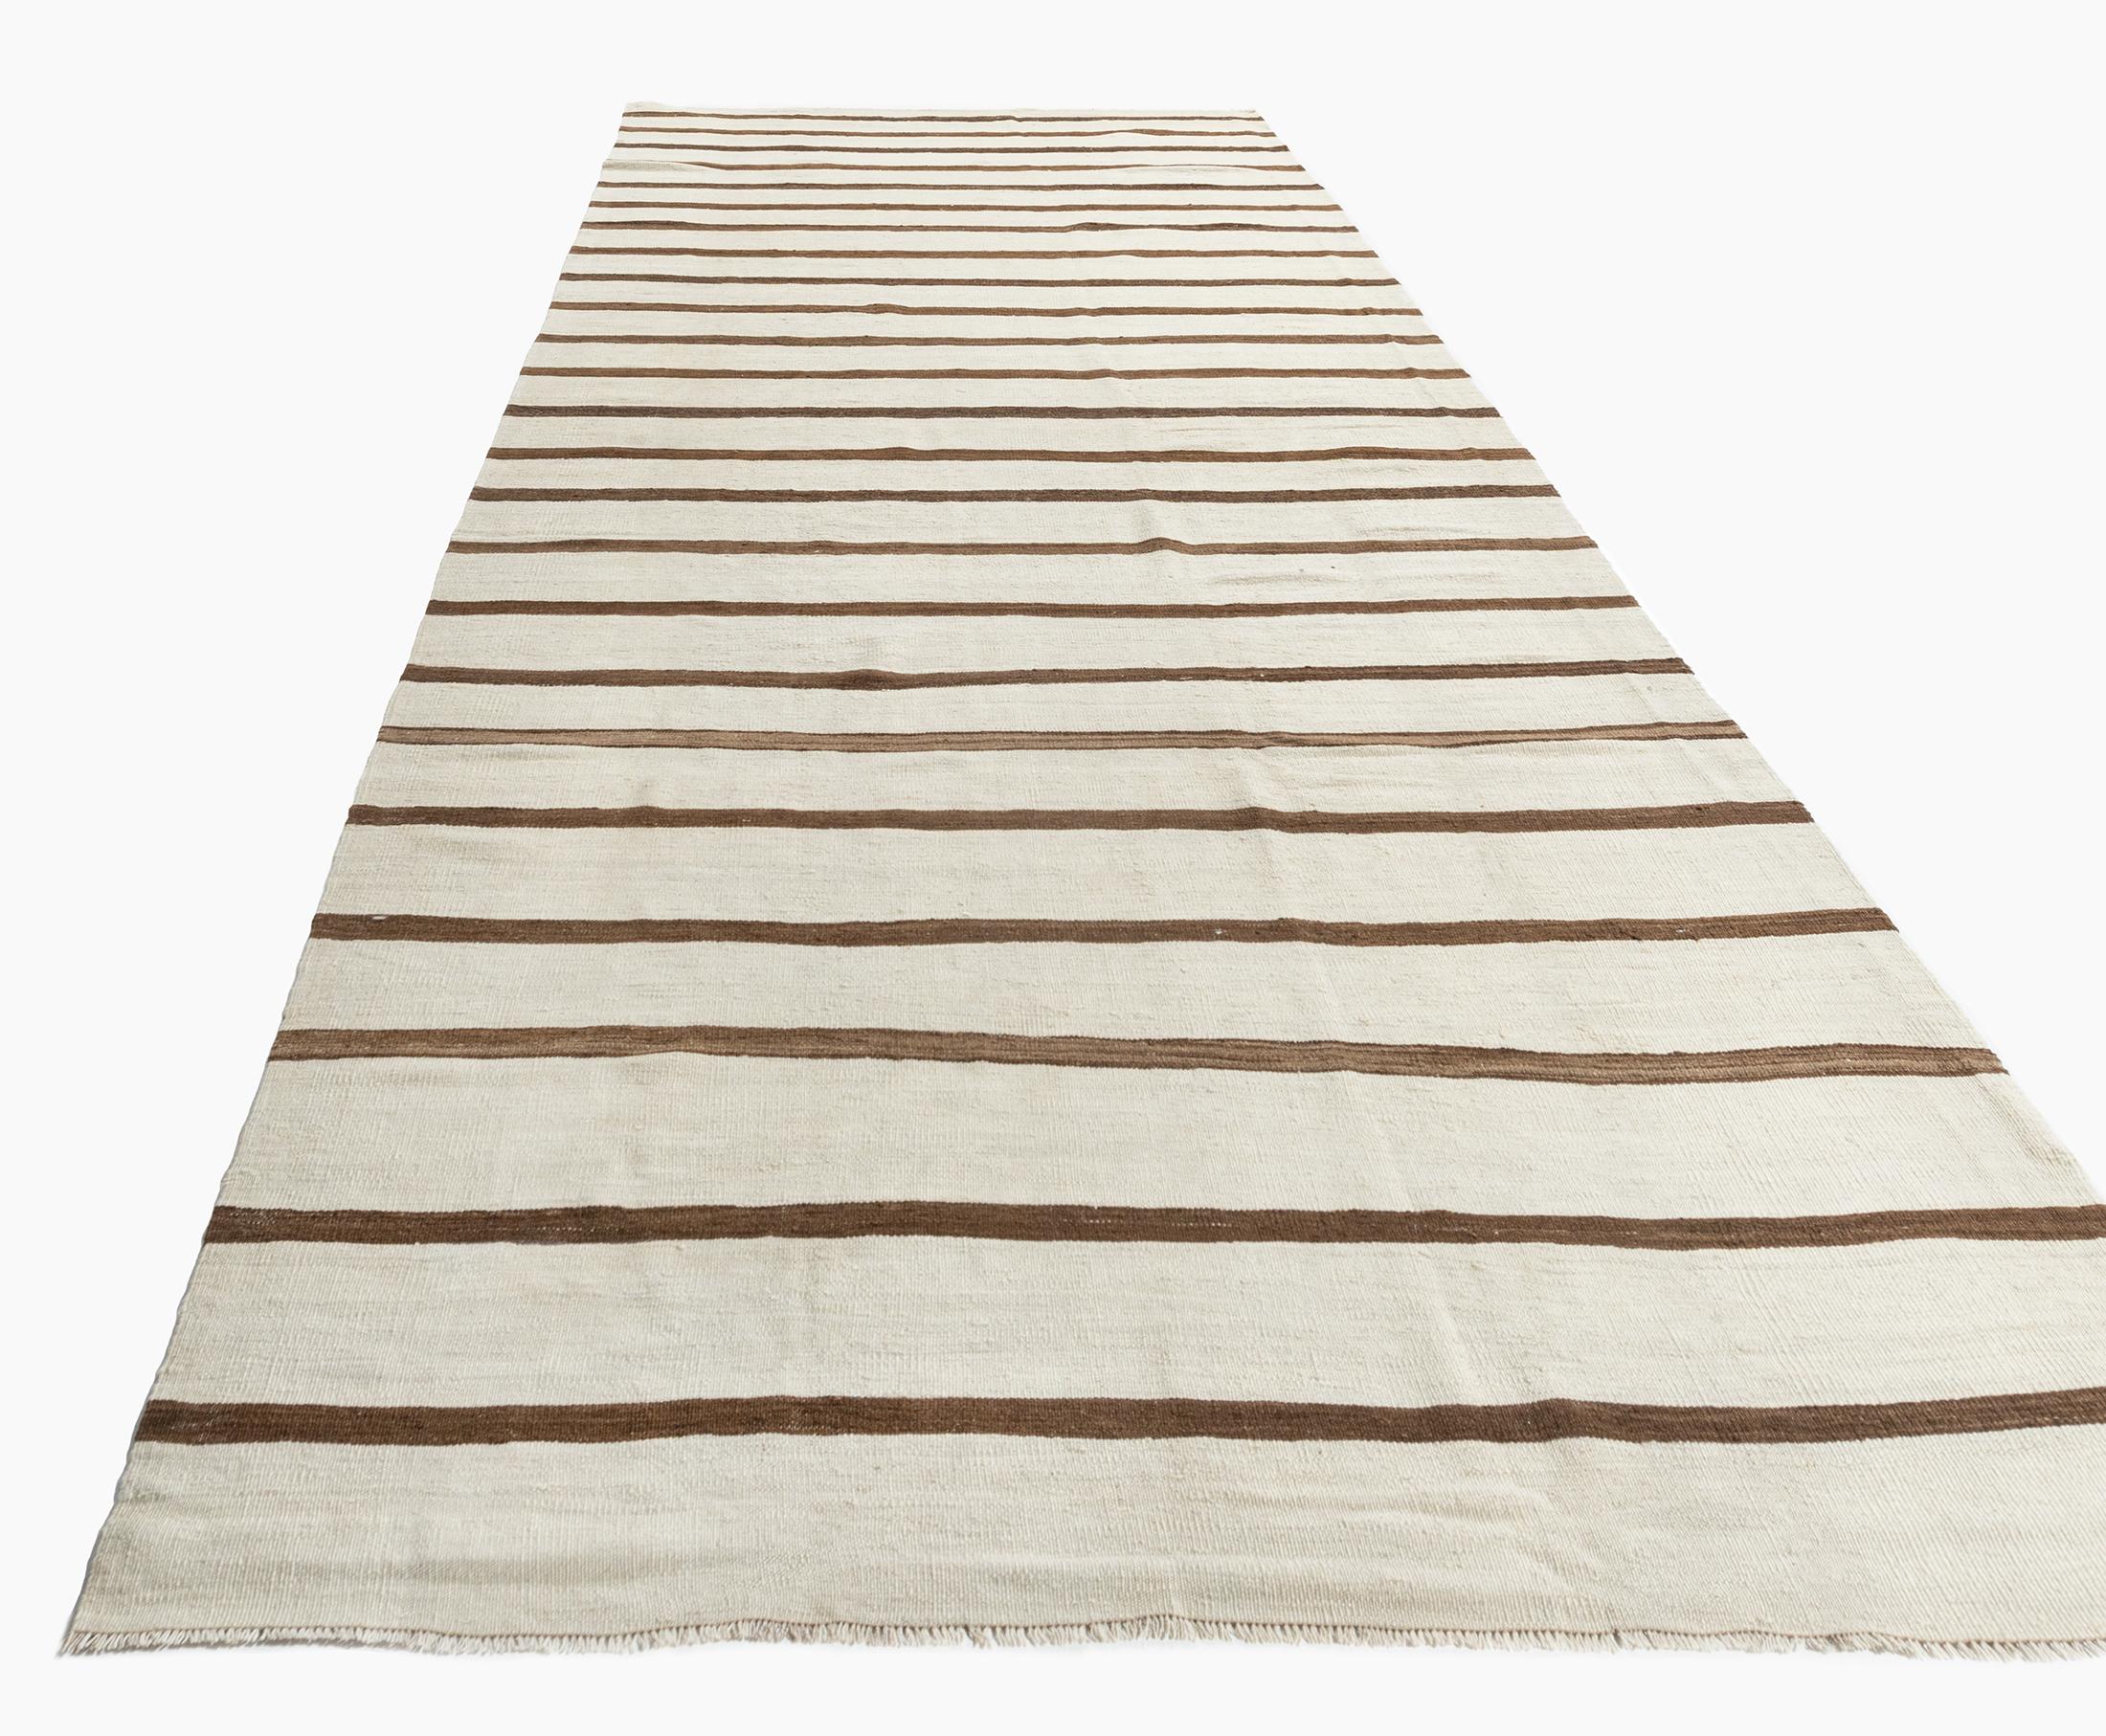 Vintage Ivory Turkish Kilim Runner 4'11 X 13'8. This vintage Turkish flat weave Kilim was hand-woven in the 1940's. The simplicity and boldness of this piece can also give a contemporary feel and is able to look at home in both a modern and